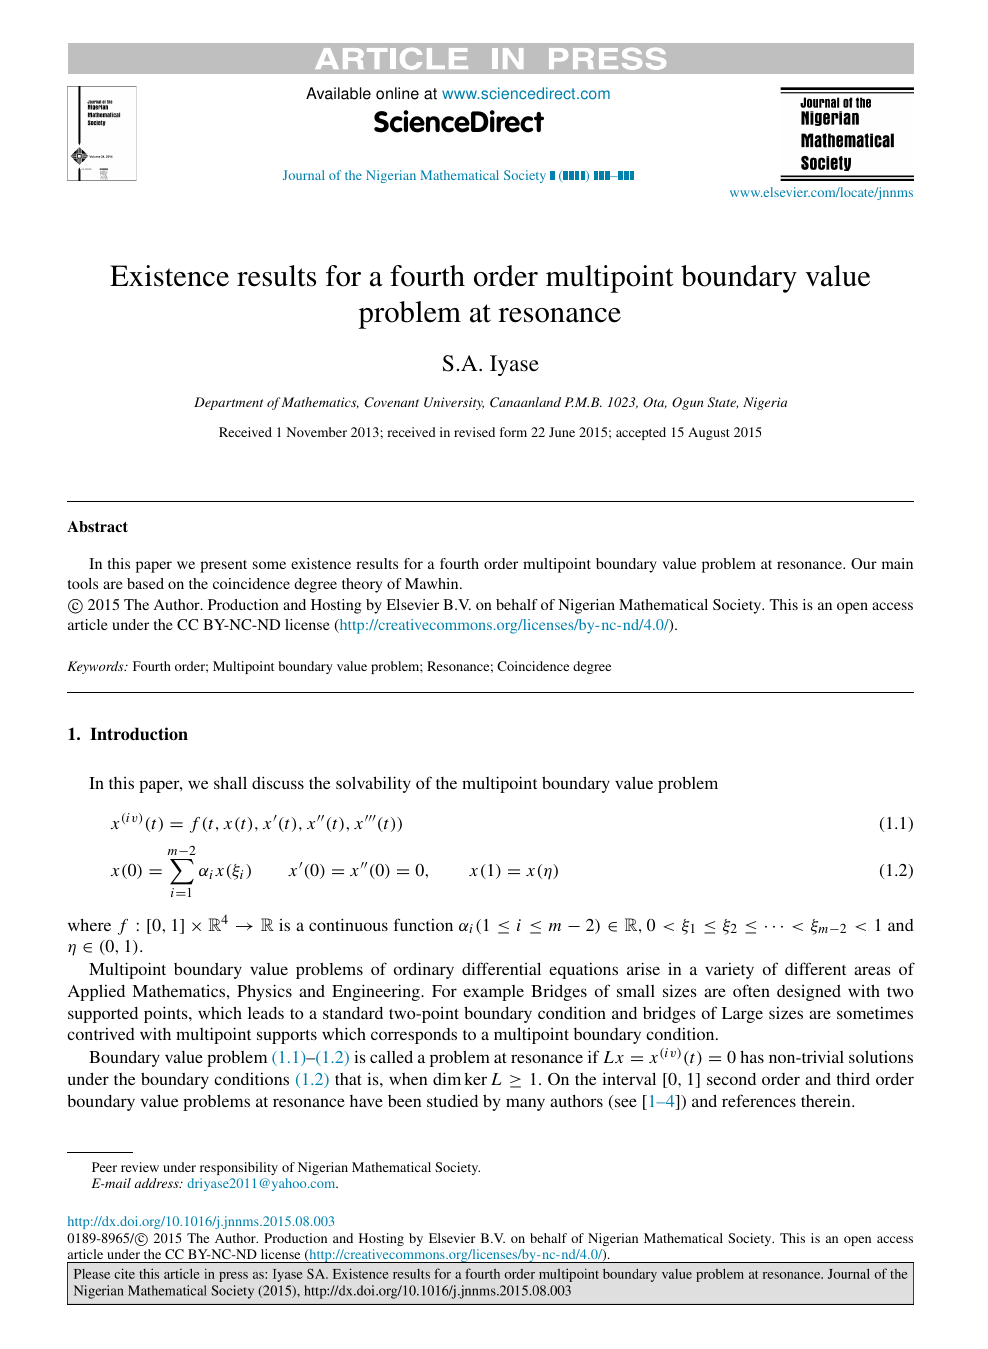 Existence Results For A Fourth Order Multipoint Boundary Value Problem At Resonance Topic Of Research Paper In Mathematics Download Scholarly Article Pdf And Read For Free On Cyberleninka Open Science Hub